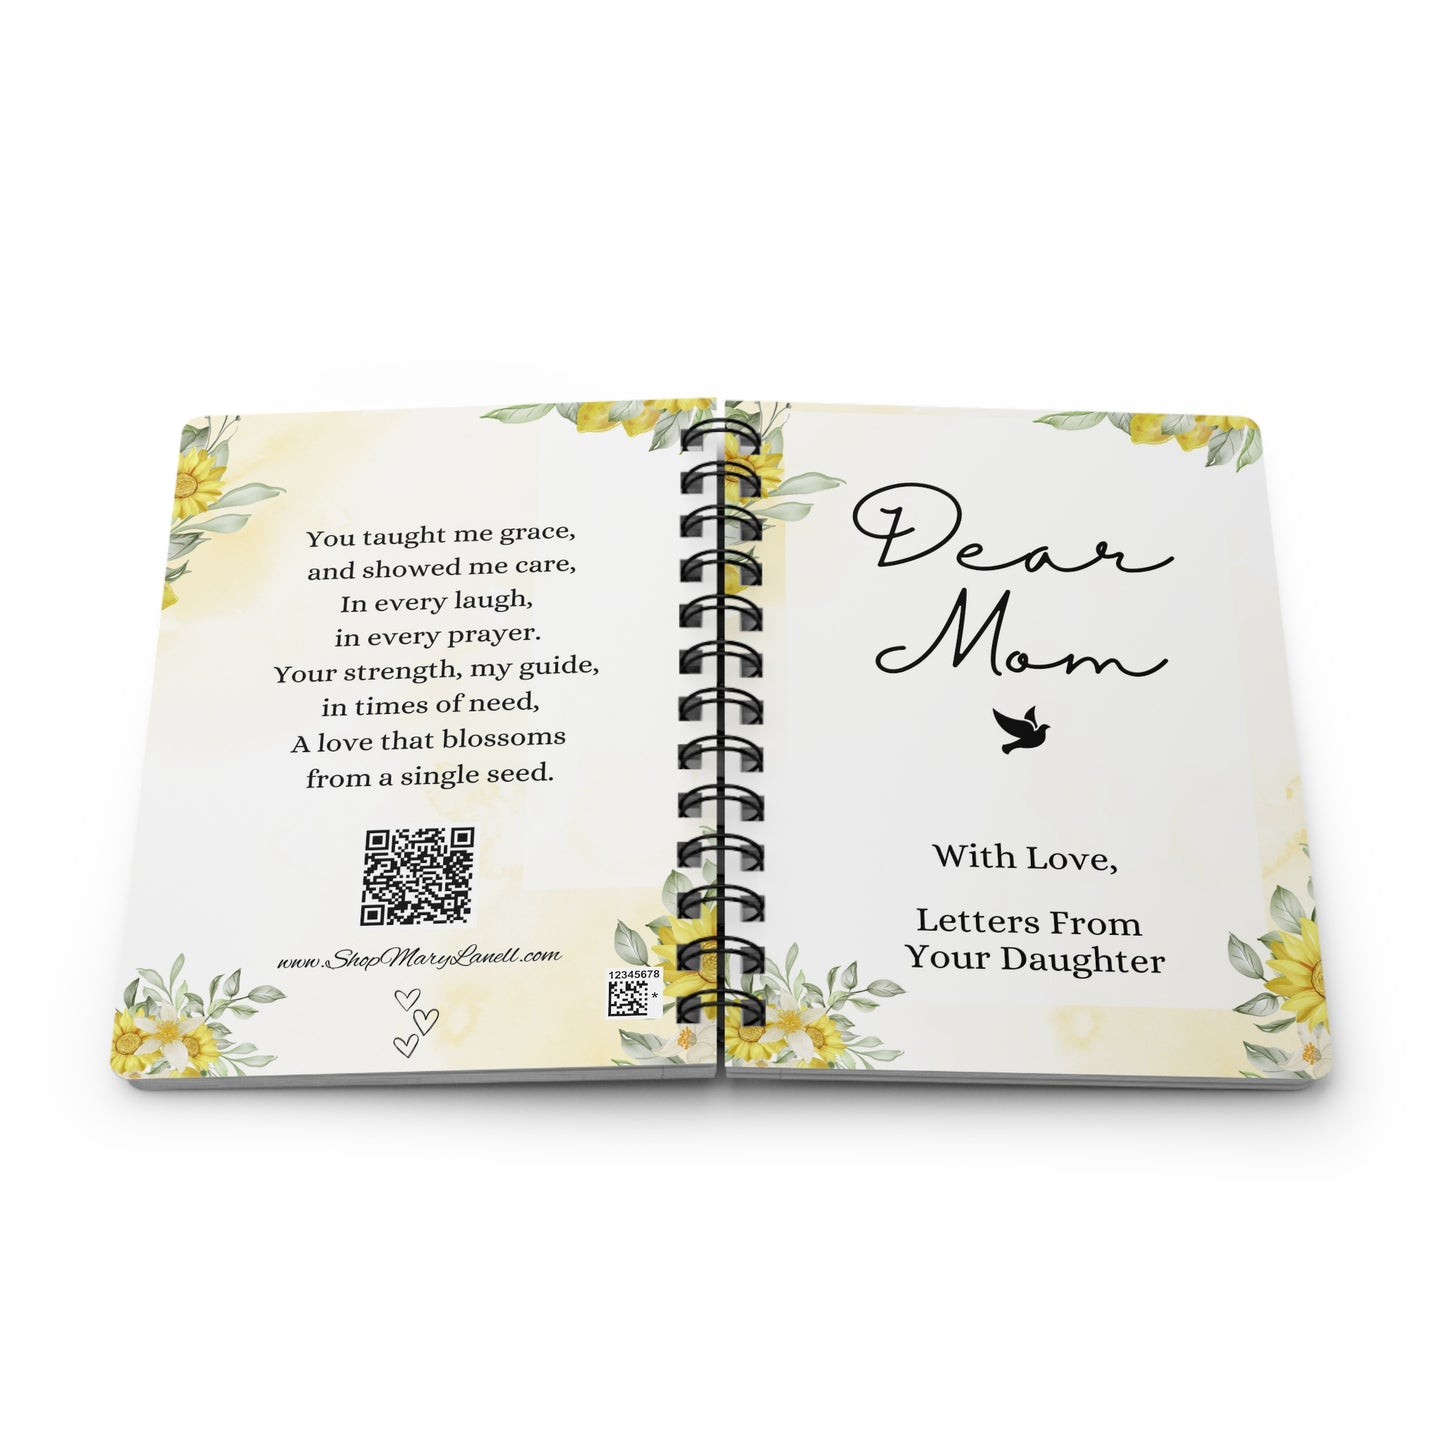 Dear Mom Journal: Letters From Your Daughter